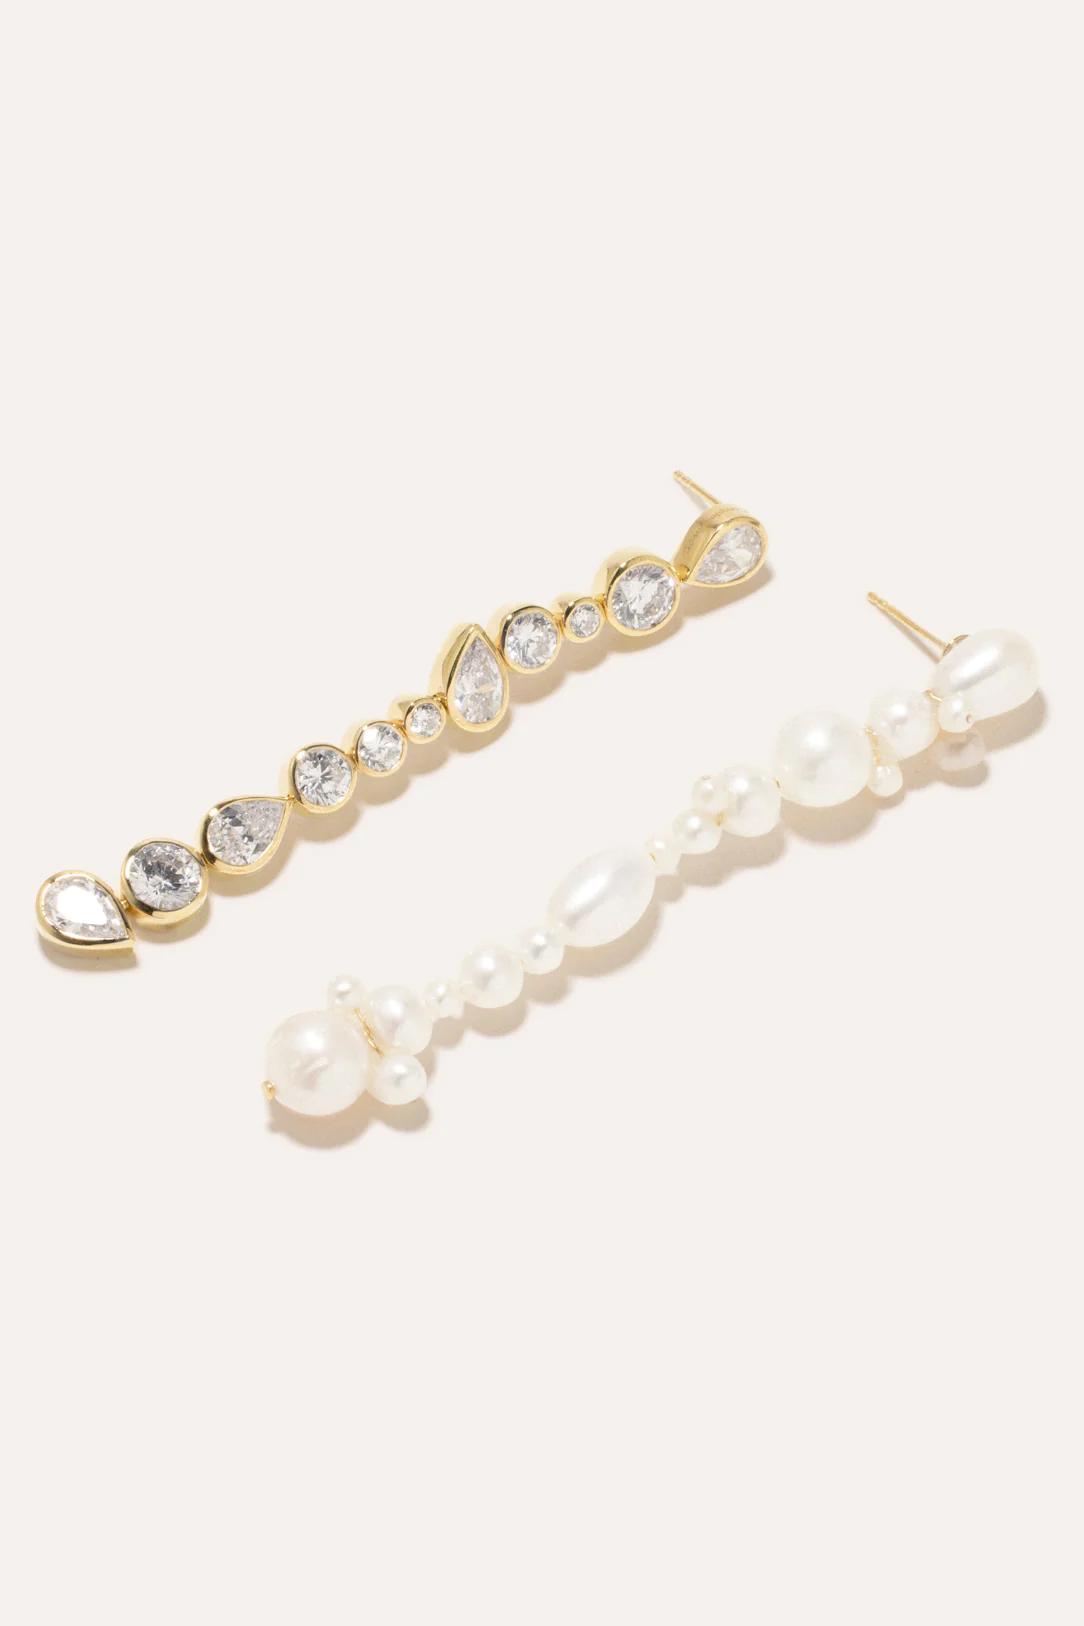 Product Image for Glitch Earring, Pearl and Cubic Zirconia